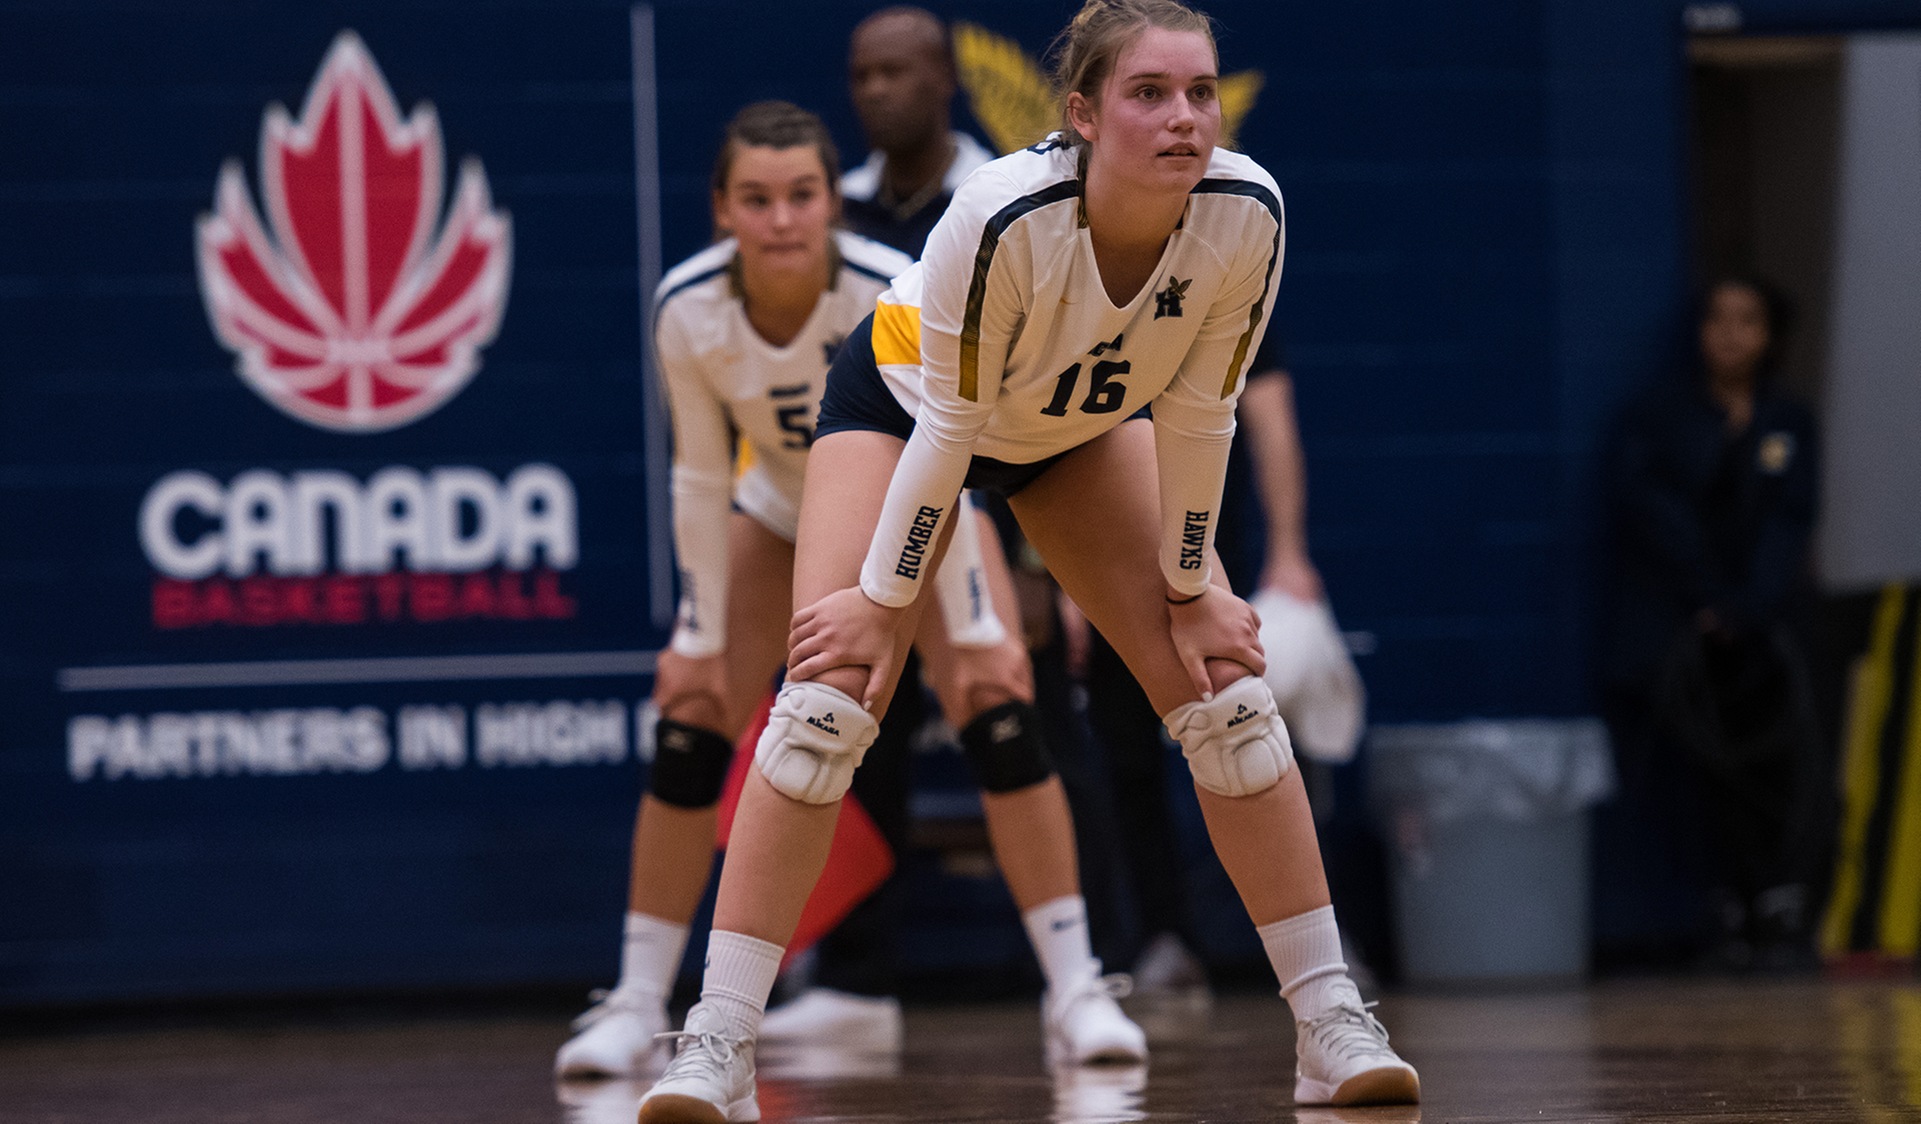 HAWKS DROP FURTHER BEHIND IN RACE BY WAY OF FIVE-SET LOSS TO ST.CLAIR